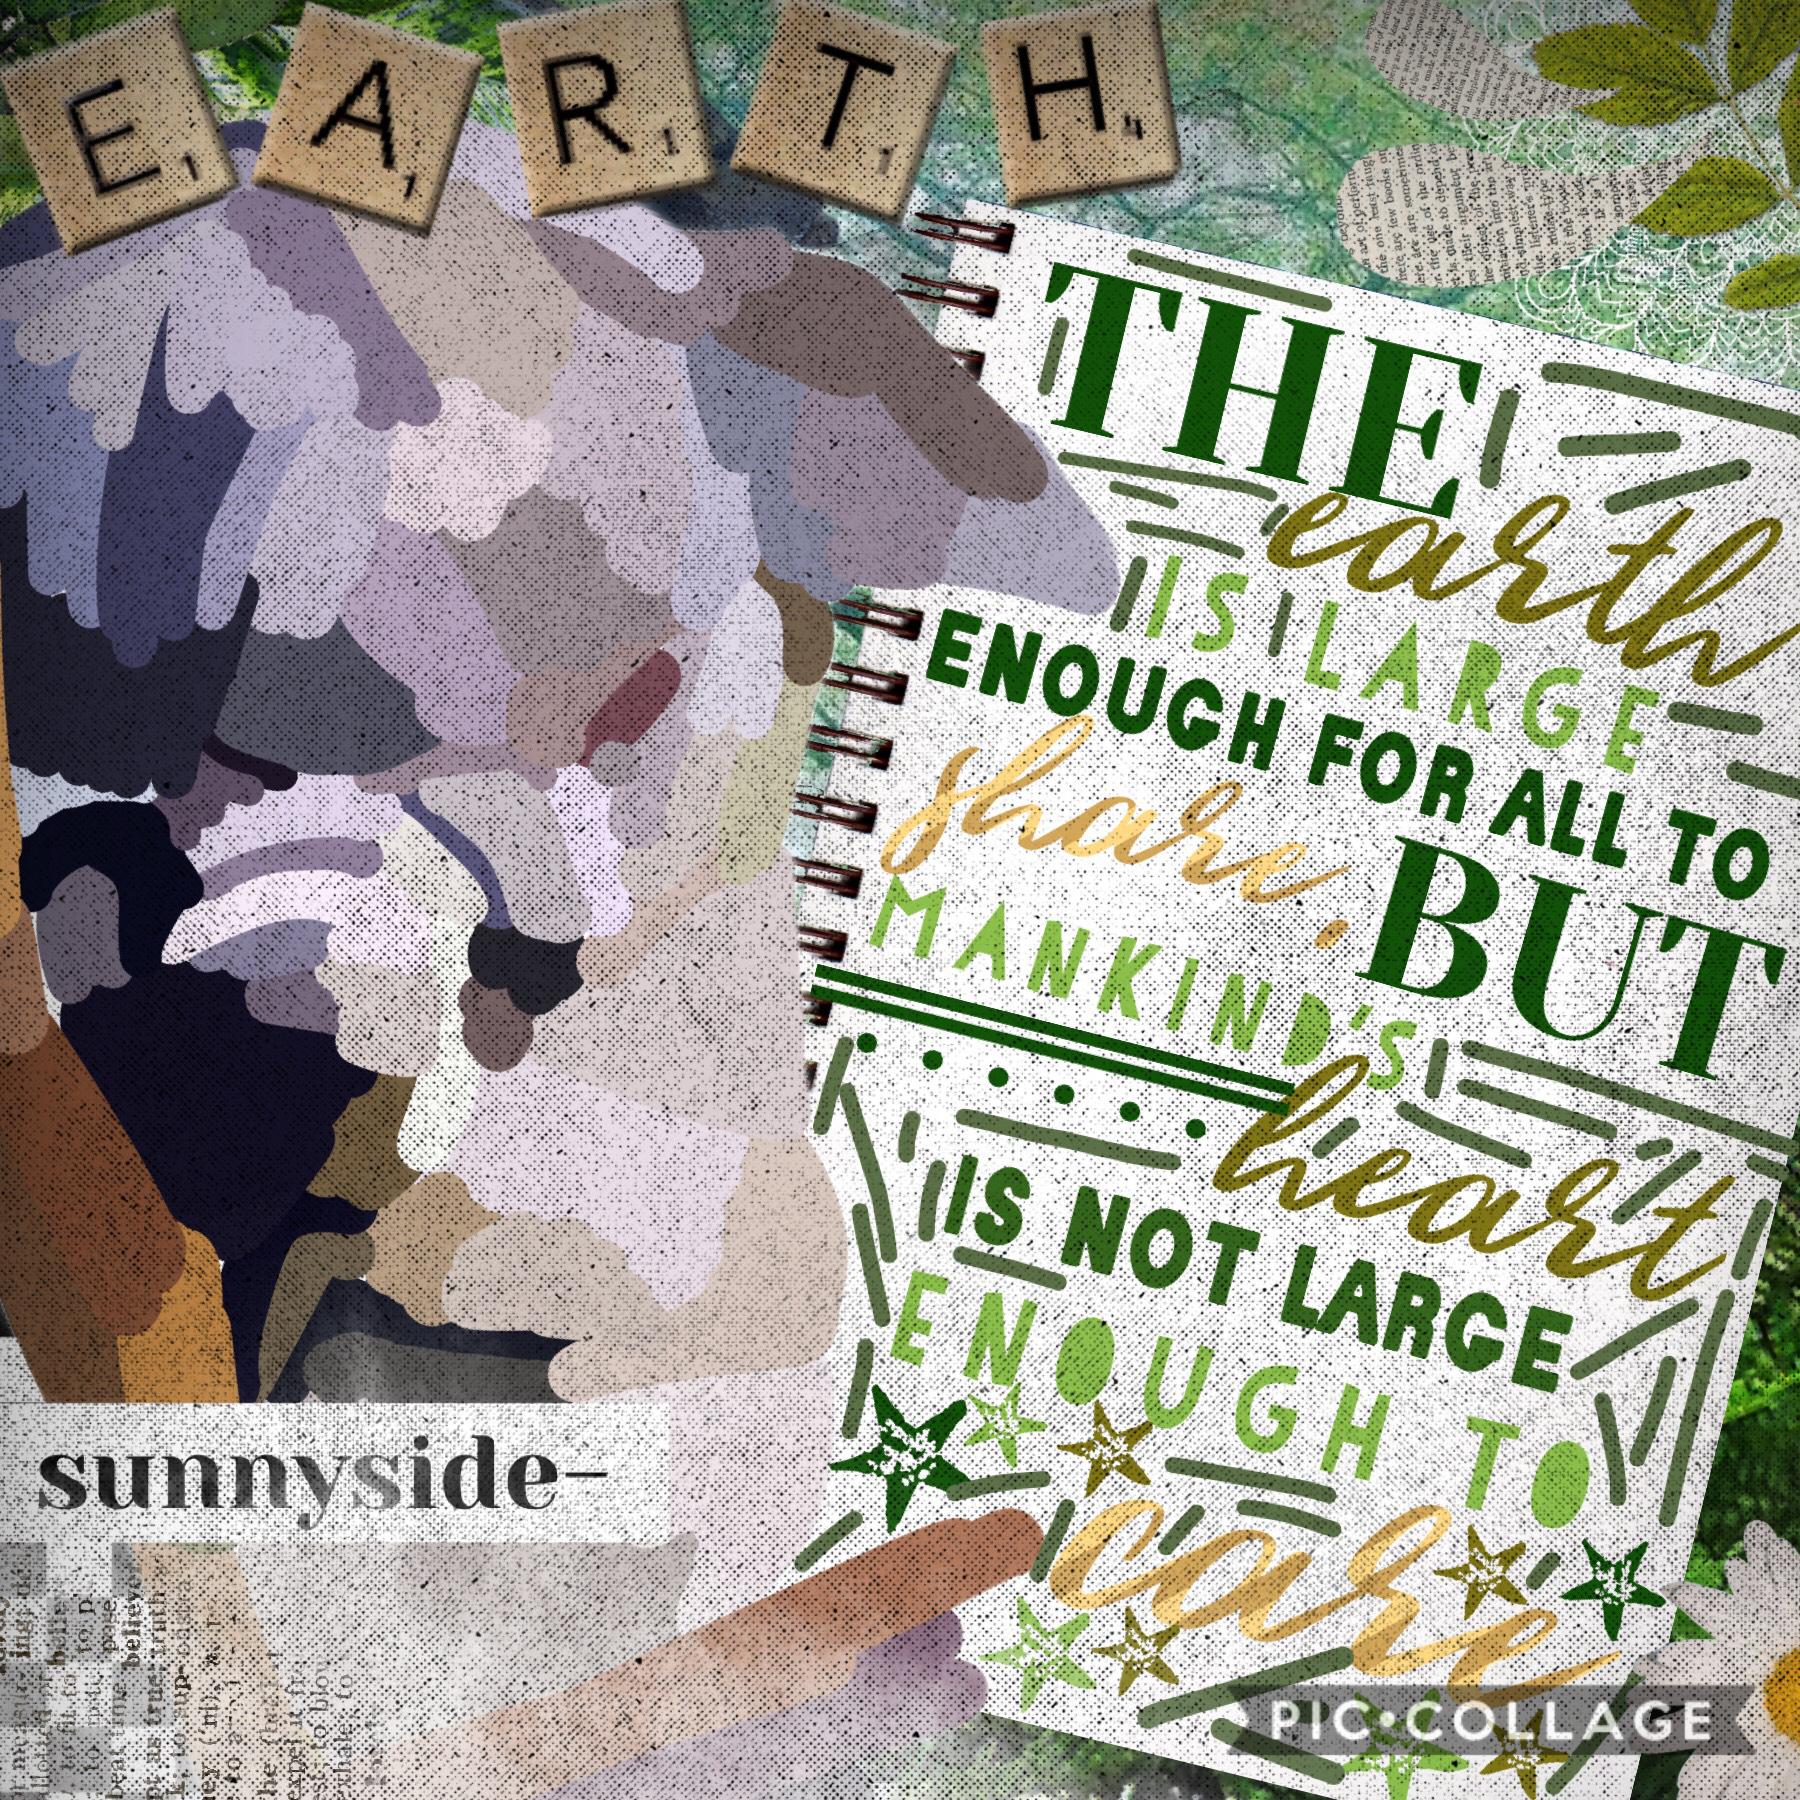 I’ve never been so inspired to make a collage. (tap)

You probably can’t tell, but this is a koala. I’m just bad at tracing images 😔 this quote is so powerful omg